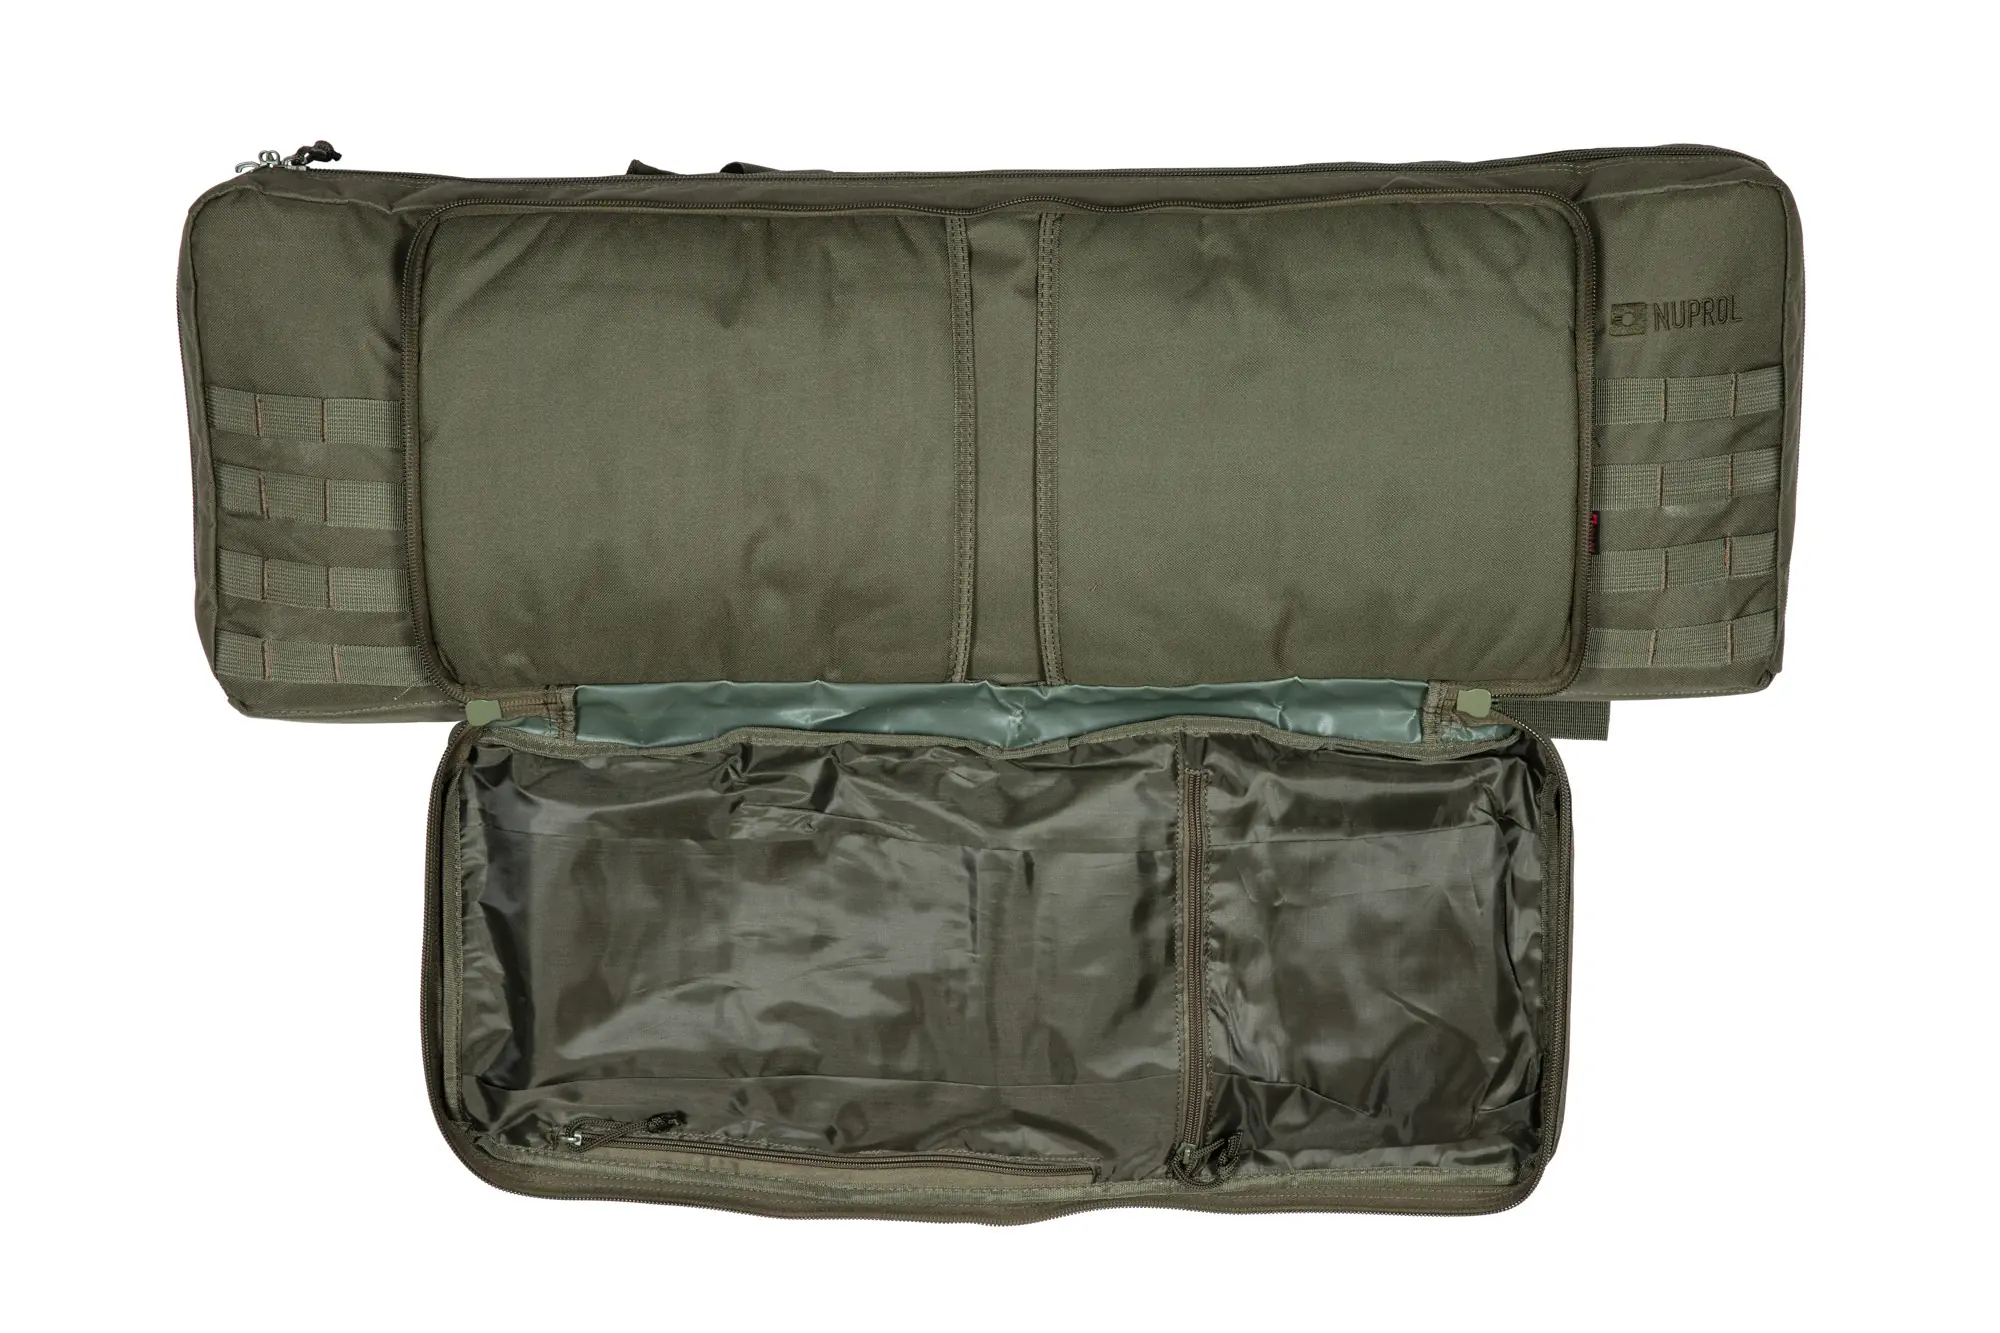 NP PMC Deluxe Soft Double Rifle Bag 36" - Green